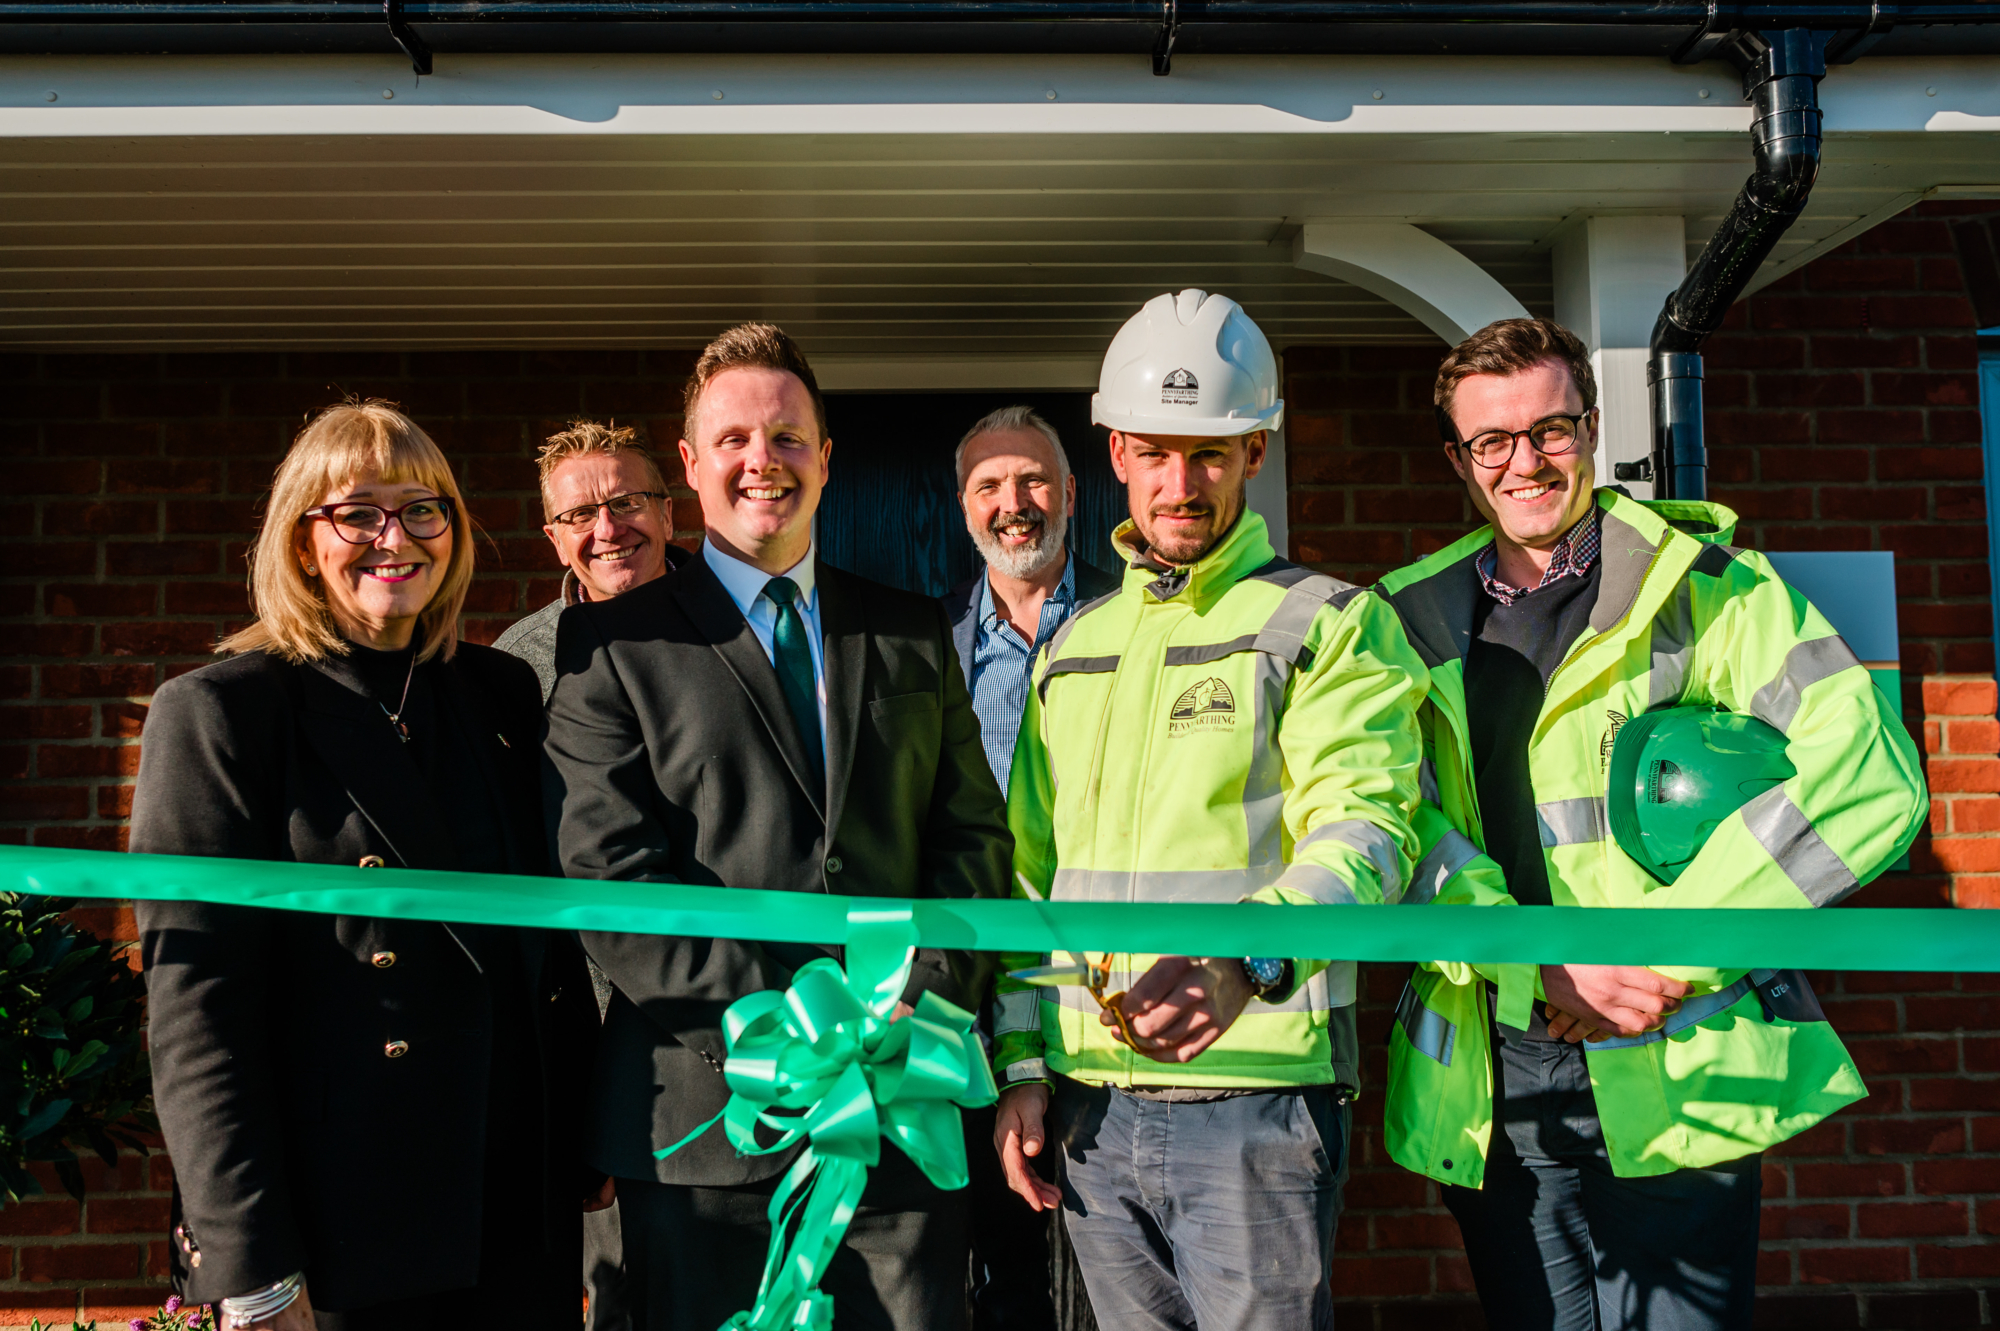 Pennyfarthing Homes launches its new Whitsbury Green development in Fordingbridge